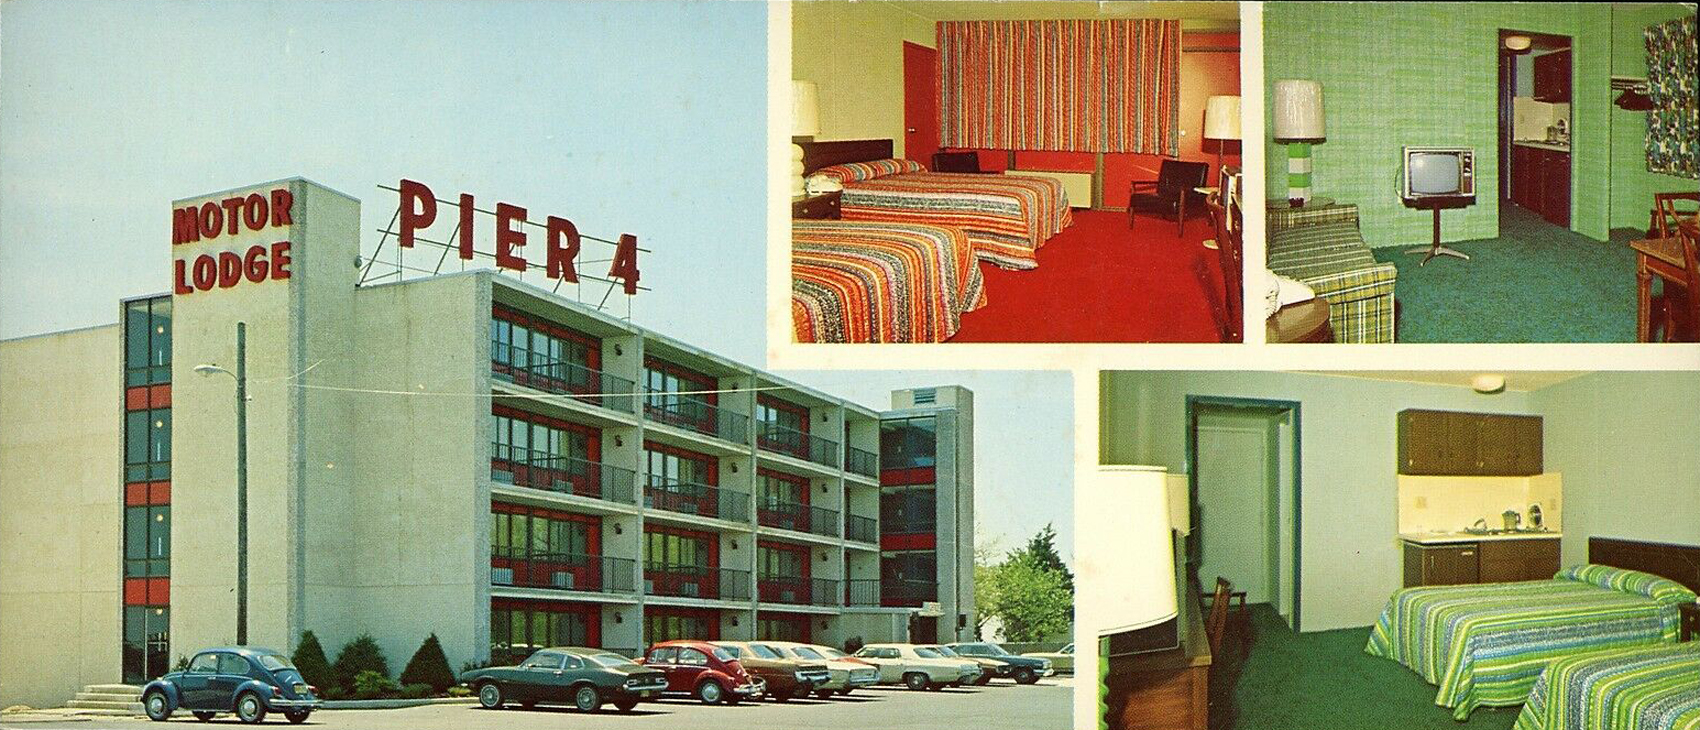 Somers Point - Pier 4 Motor Lodge